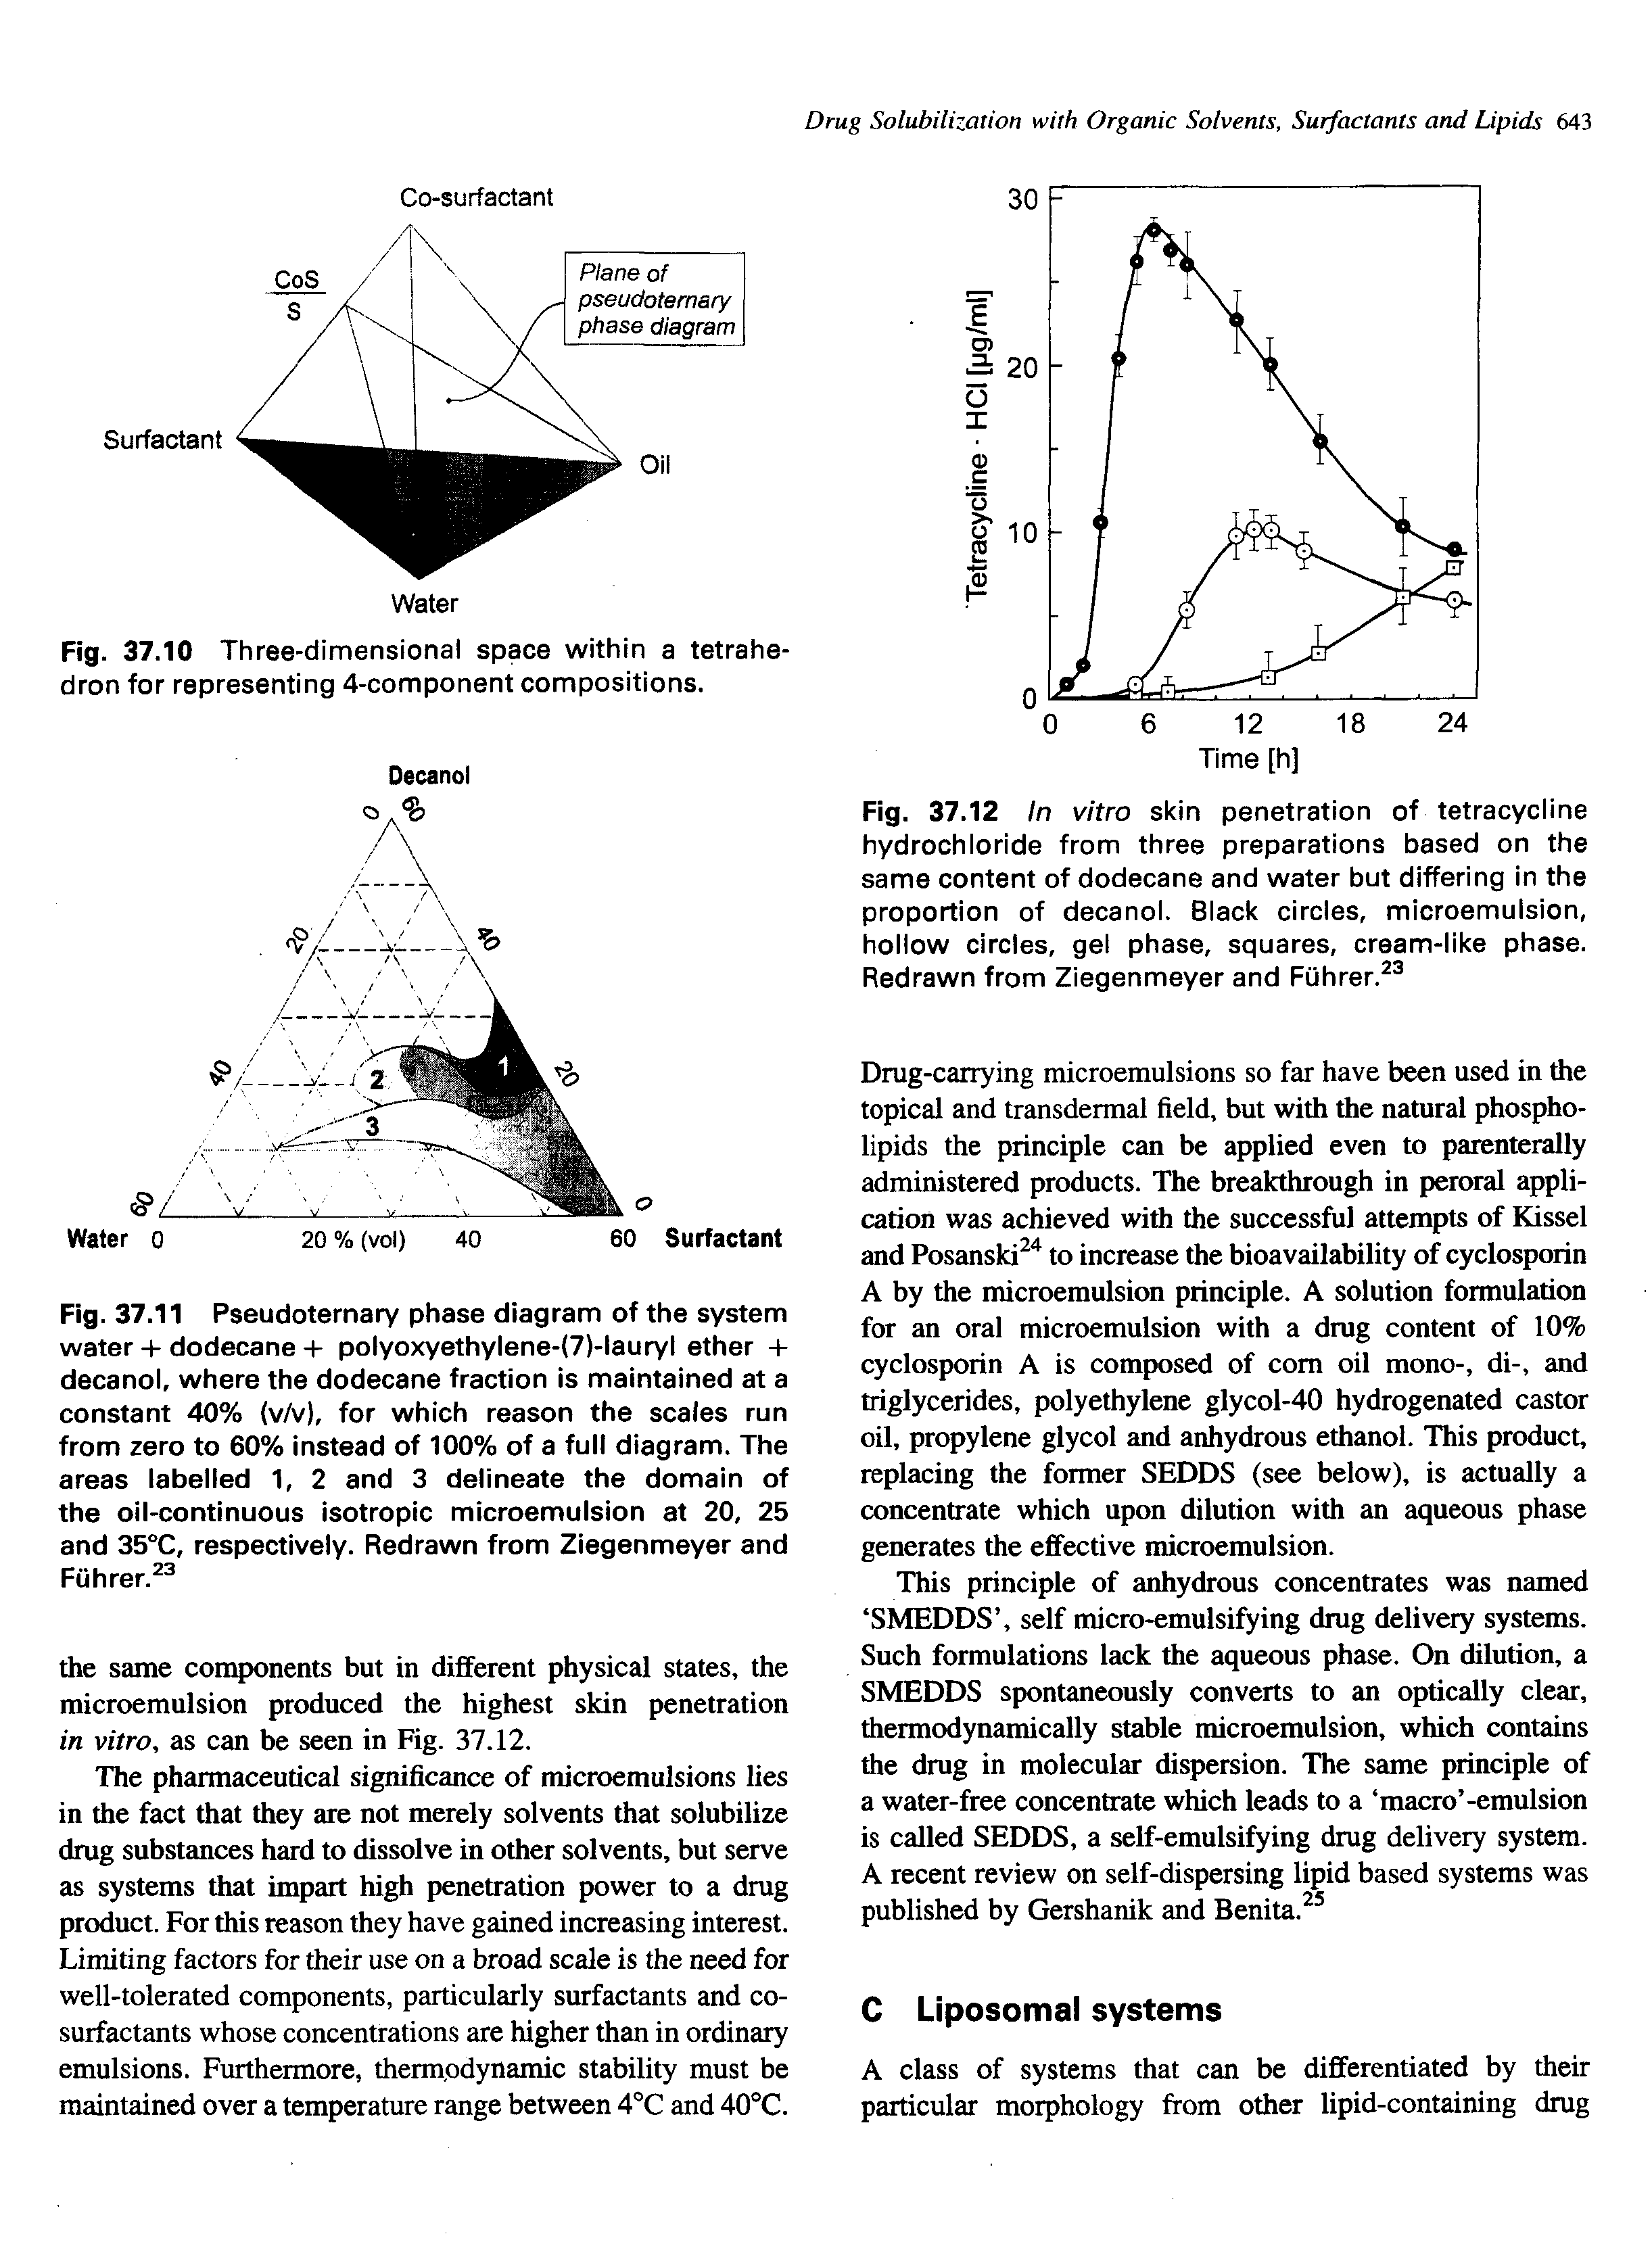 Fig. 37.11 Pseudoternary phase diagram of the system water - - dodecane -I- polyoxyethylene-(7)-lauryl ether -1-decanol, where the dodecane fraction is maintained at a constant 40% (v/v), for which reason the scales run from zero to 60% instead of 100% of a full diagram. The areas labelled 1, 2 and 3 delineate the domain of the oil-continuous isotropic microemulsion at 20, 25 and 35°C, respectively. Redrawn from Ziegenmeyer and Fuhrer.2 ...